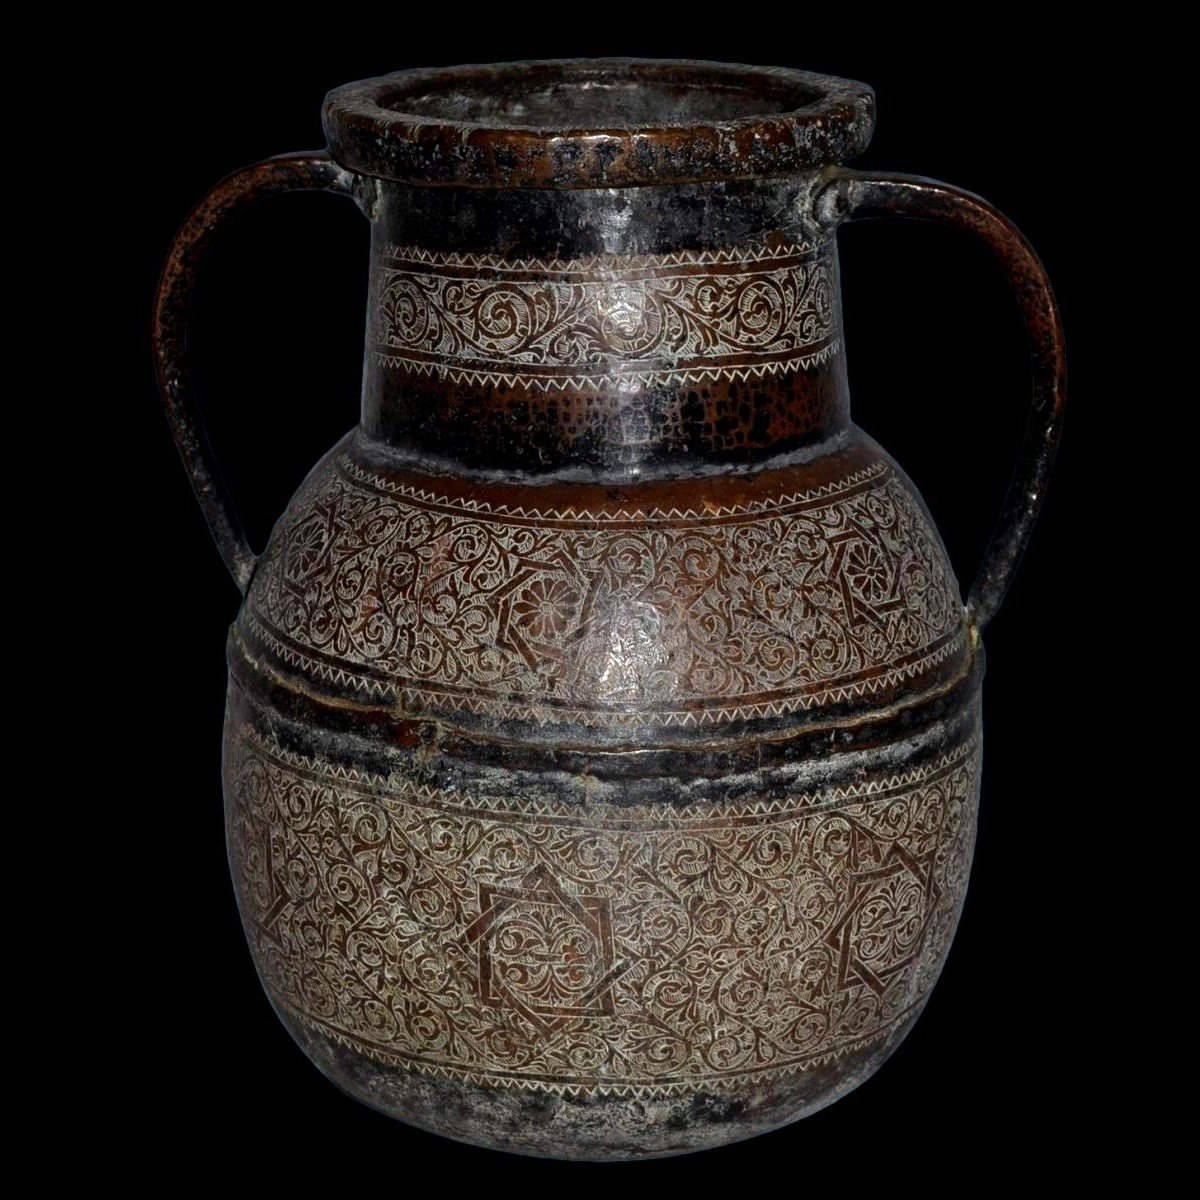 Important Persian Vase With Two Handles, Bronze And Chiseled Copper, From The 19th Century, In Very Good Condition